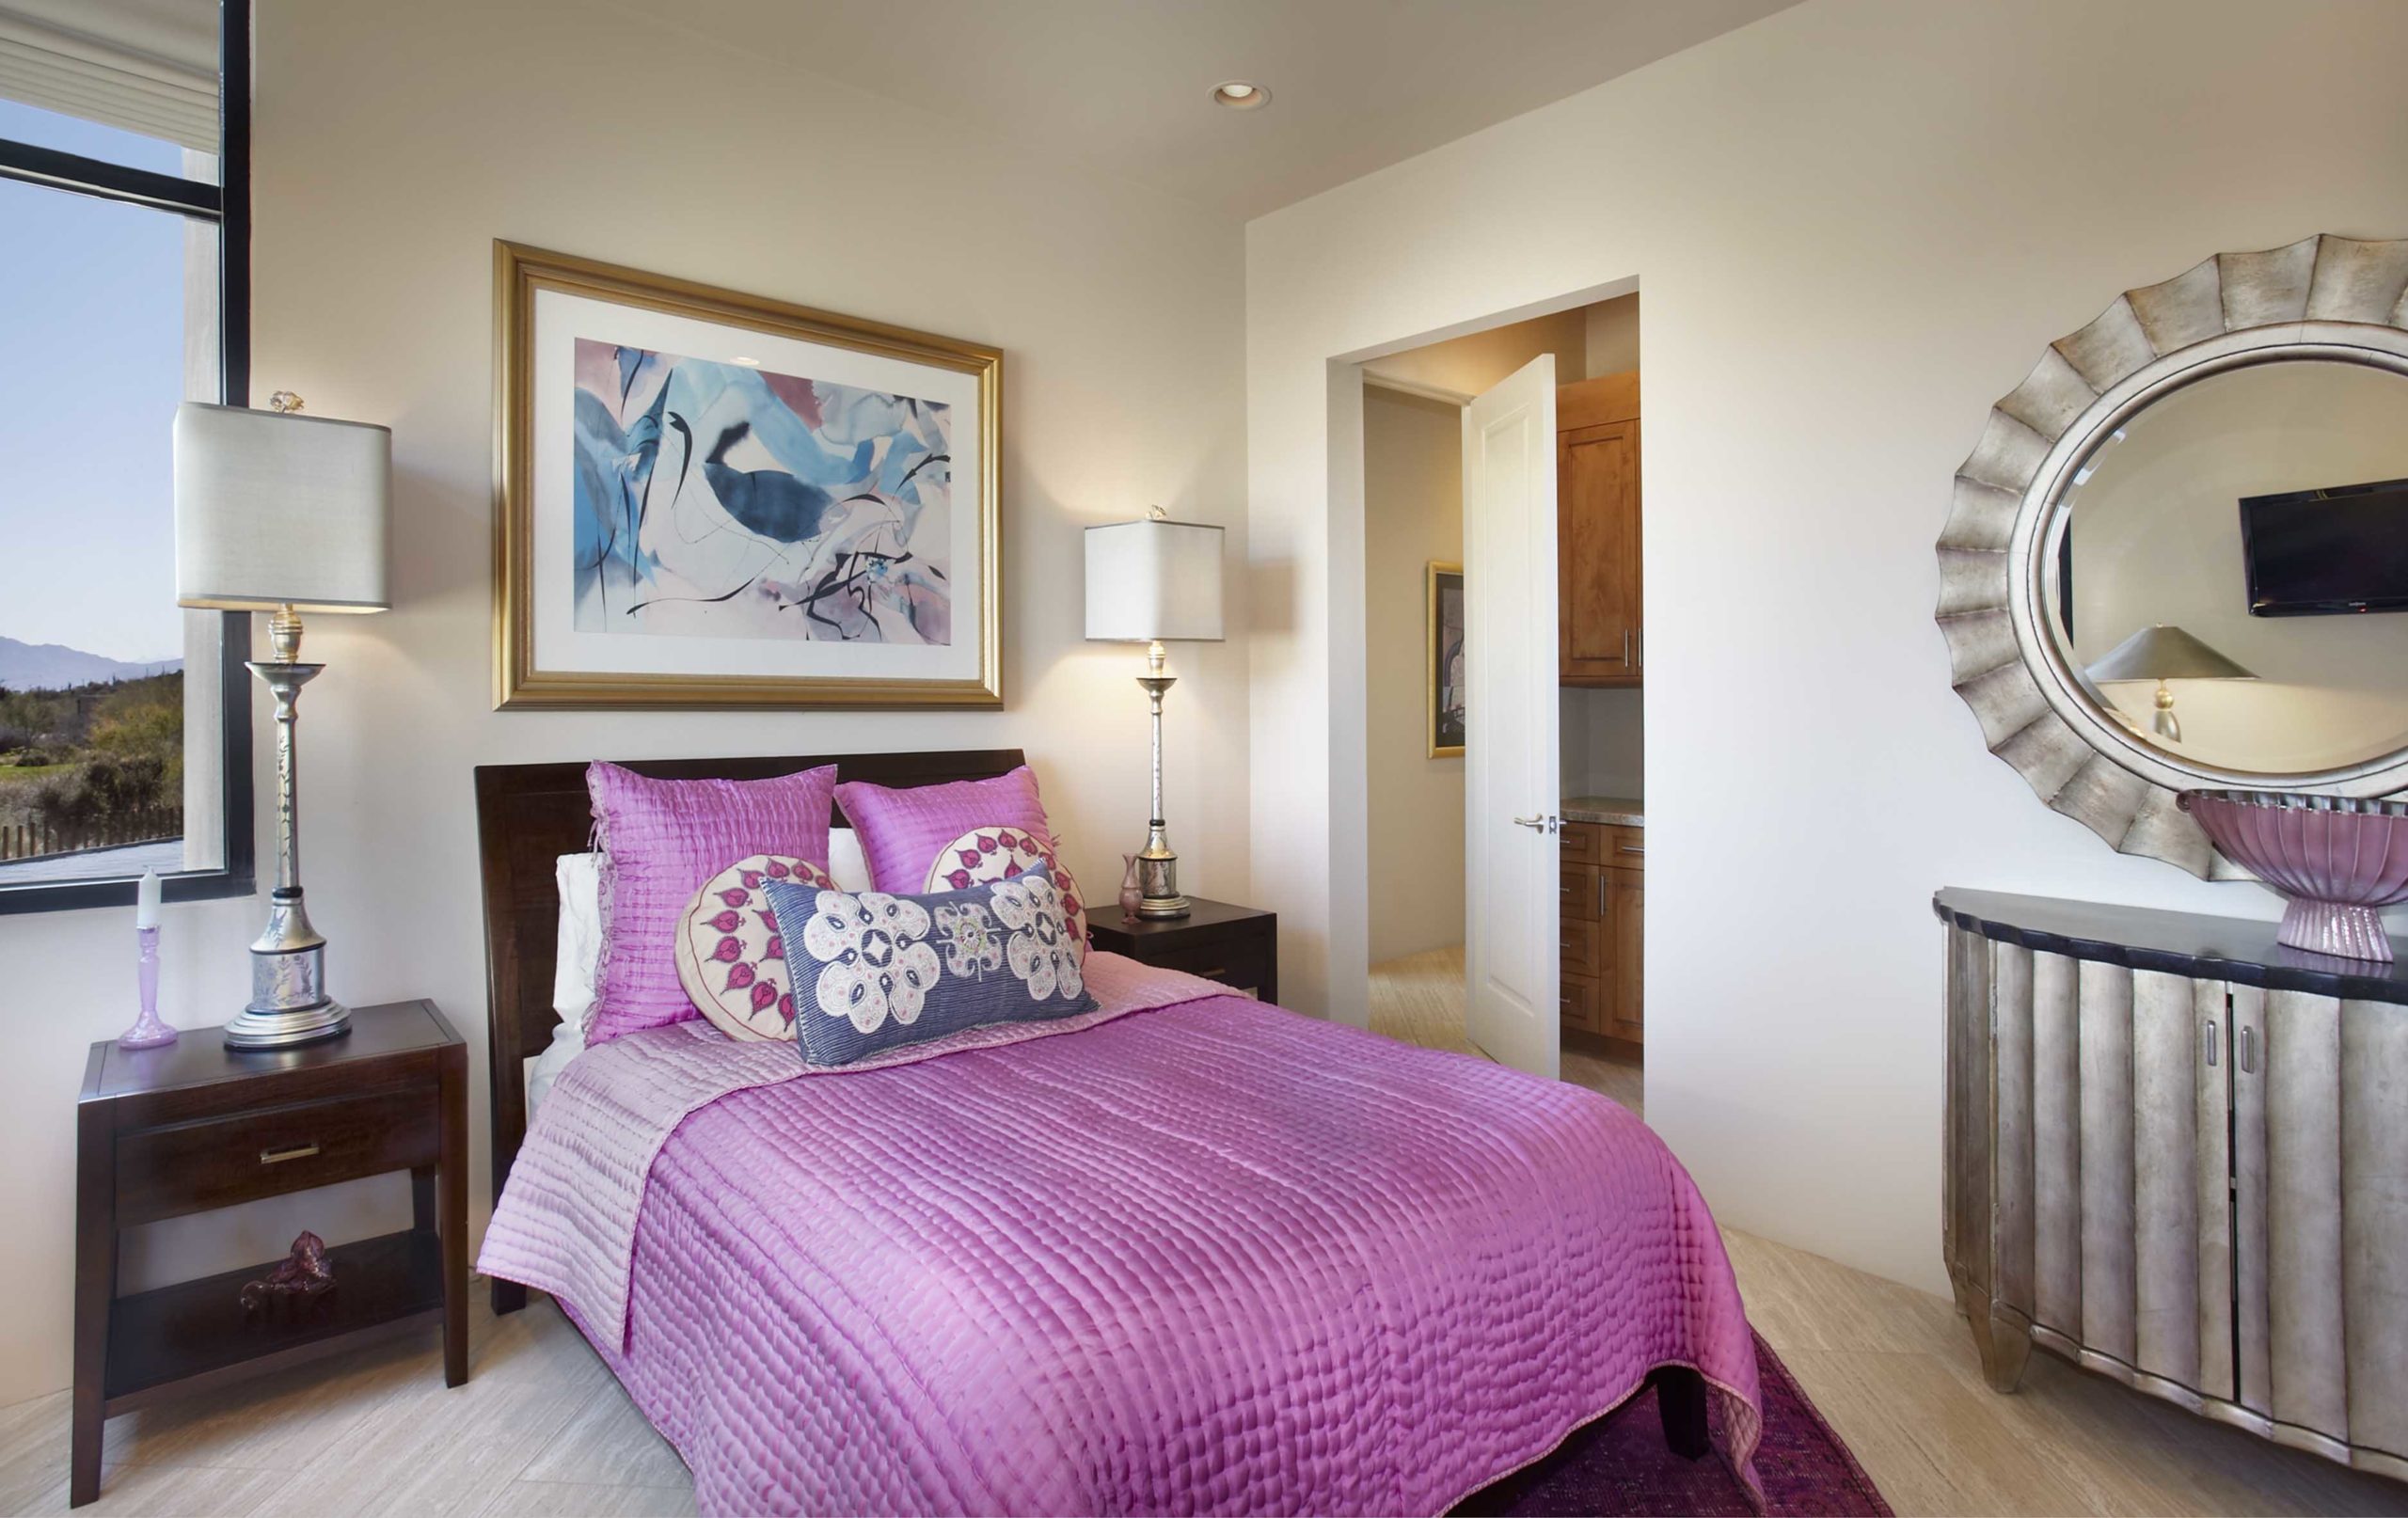 Bedroom with white walls and a bright purple comforter on the bed